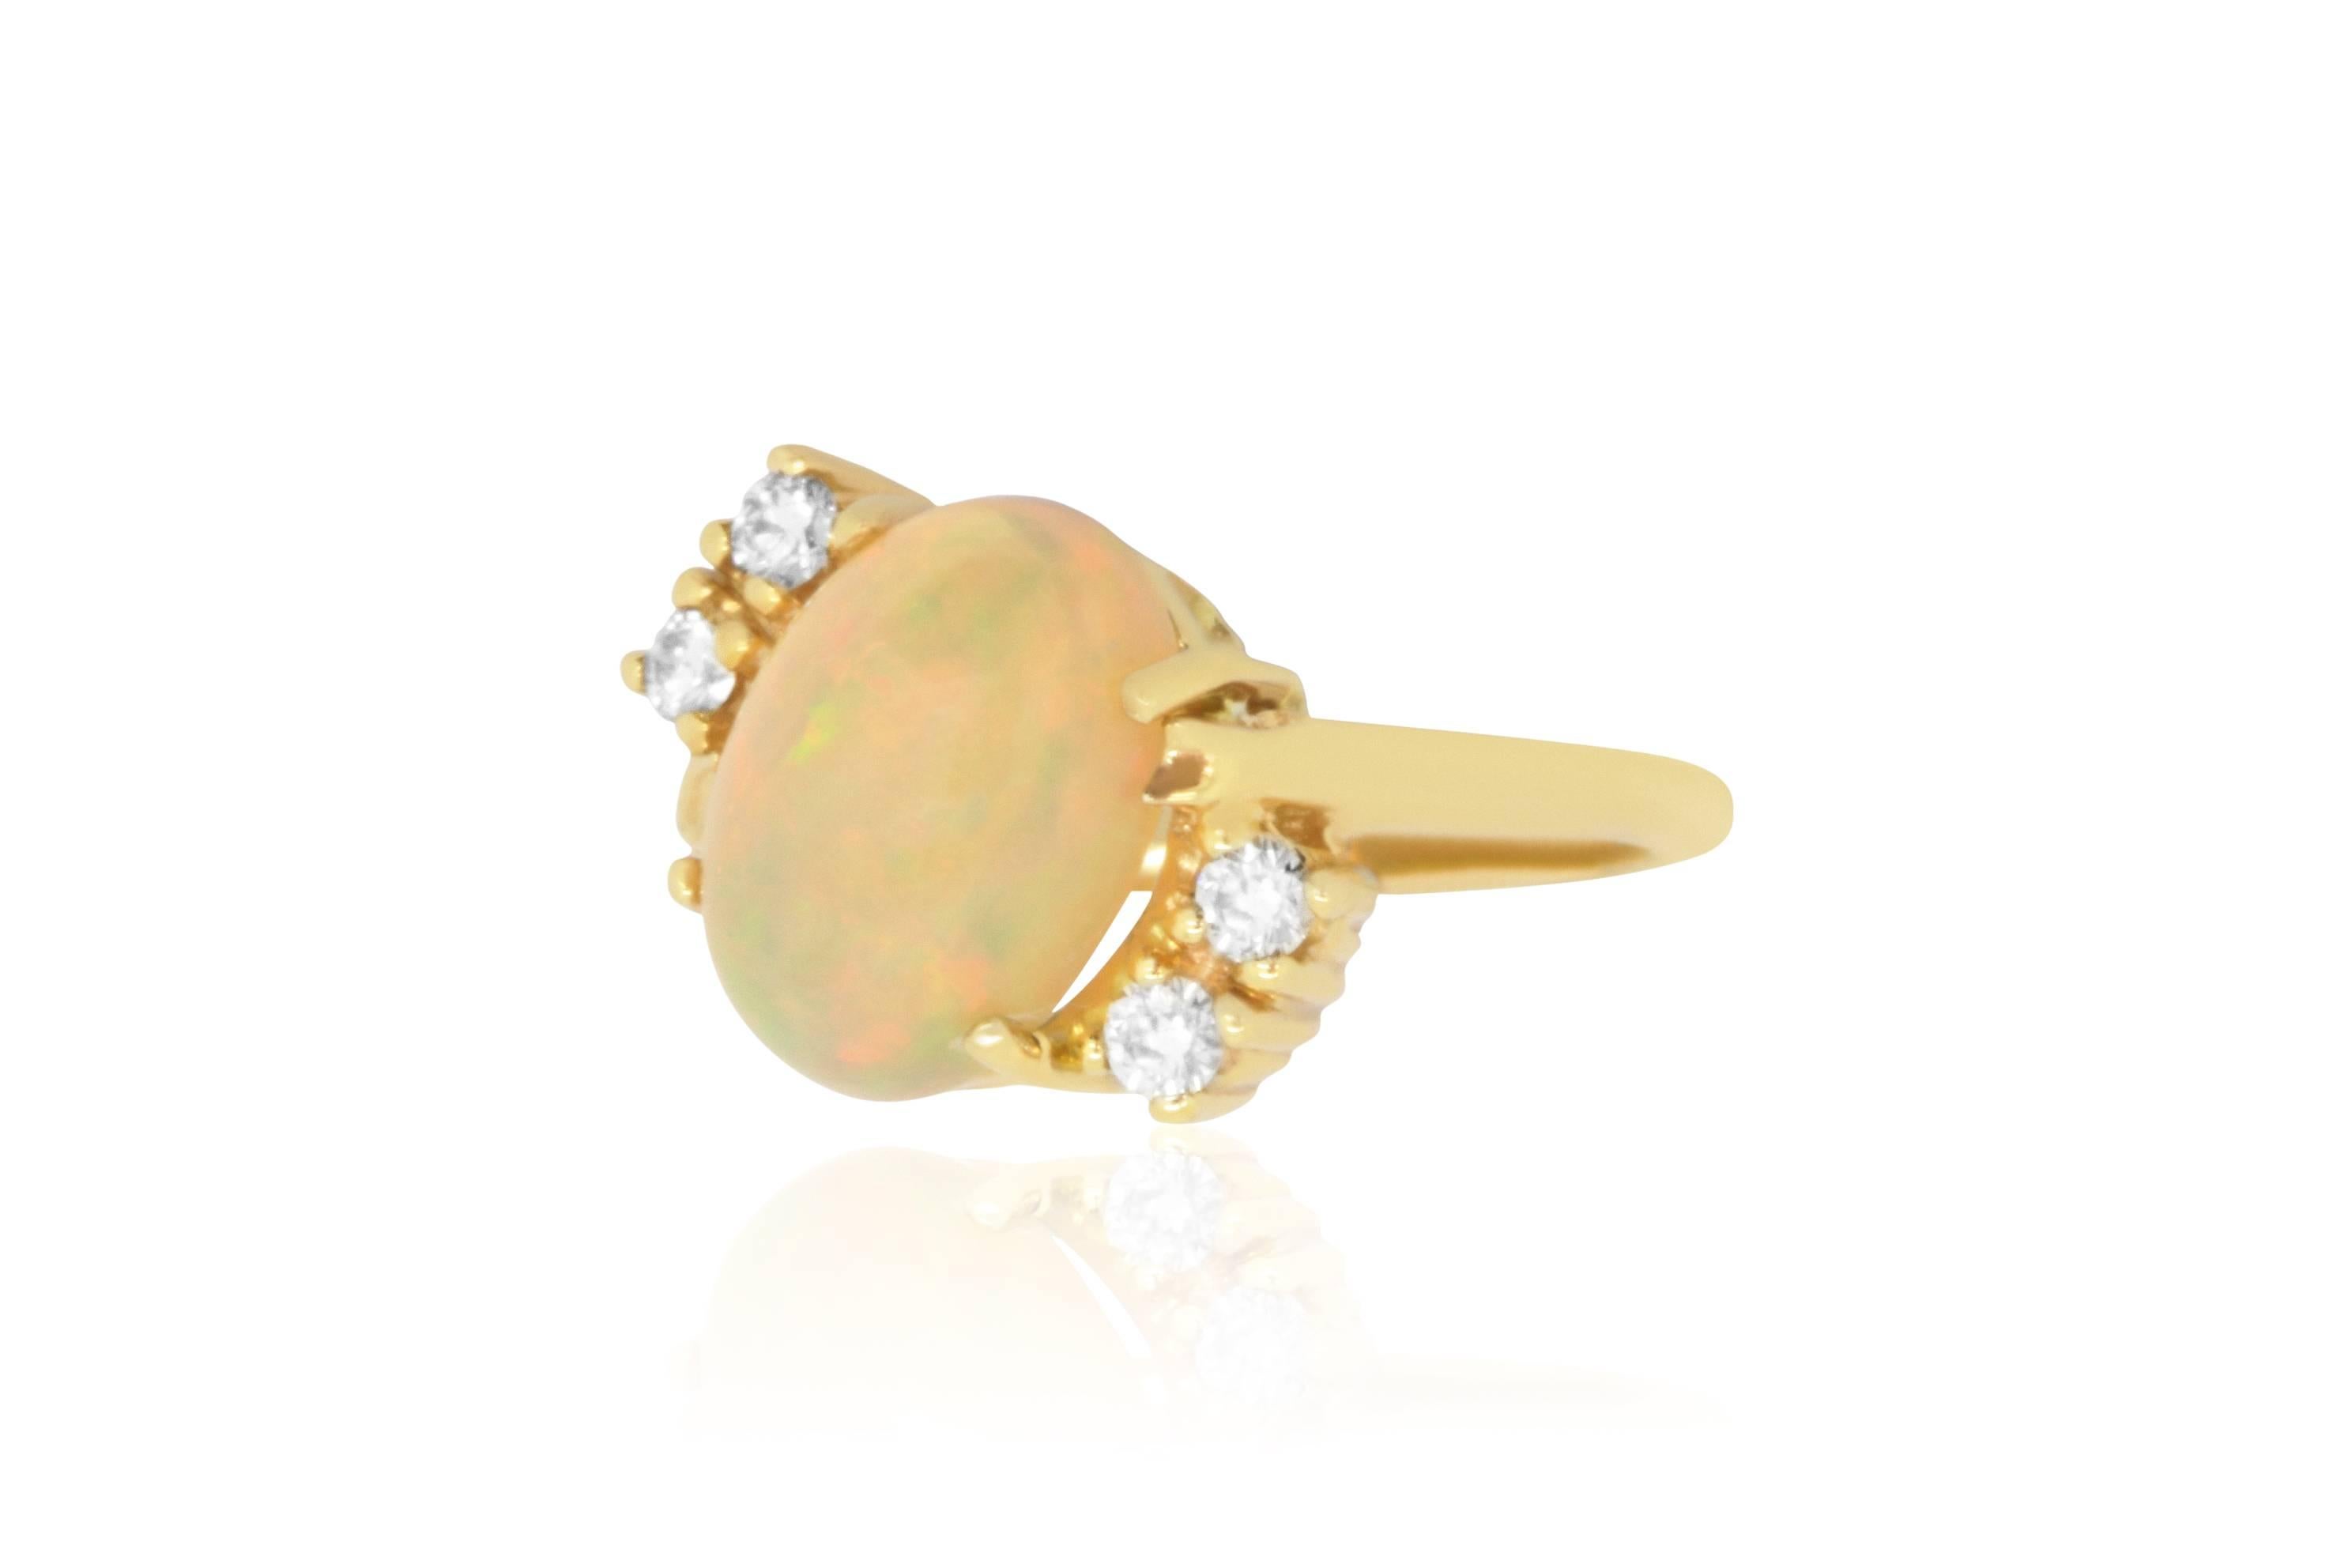 A breathtaking piece, this fabulous ring features a 3.05 Carat Oval Opal stone weighing in at 3.70 grams. It is surrounded by 4 round diamonds in an exquisite, one-of-a-kind setting. With it's incredible quality and stunning design, you know it's